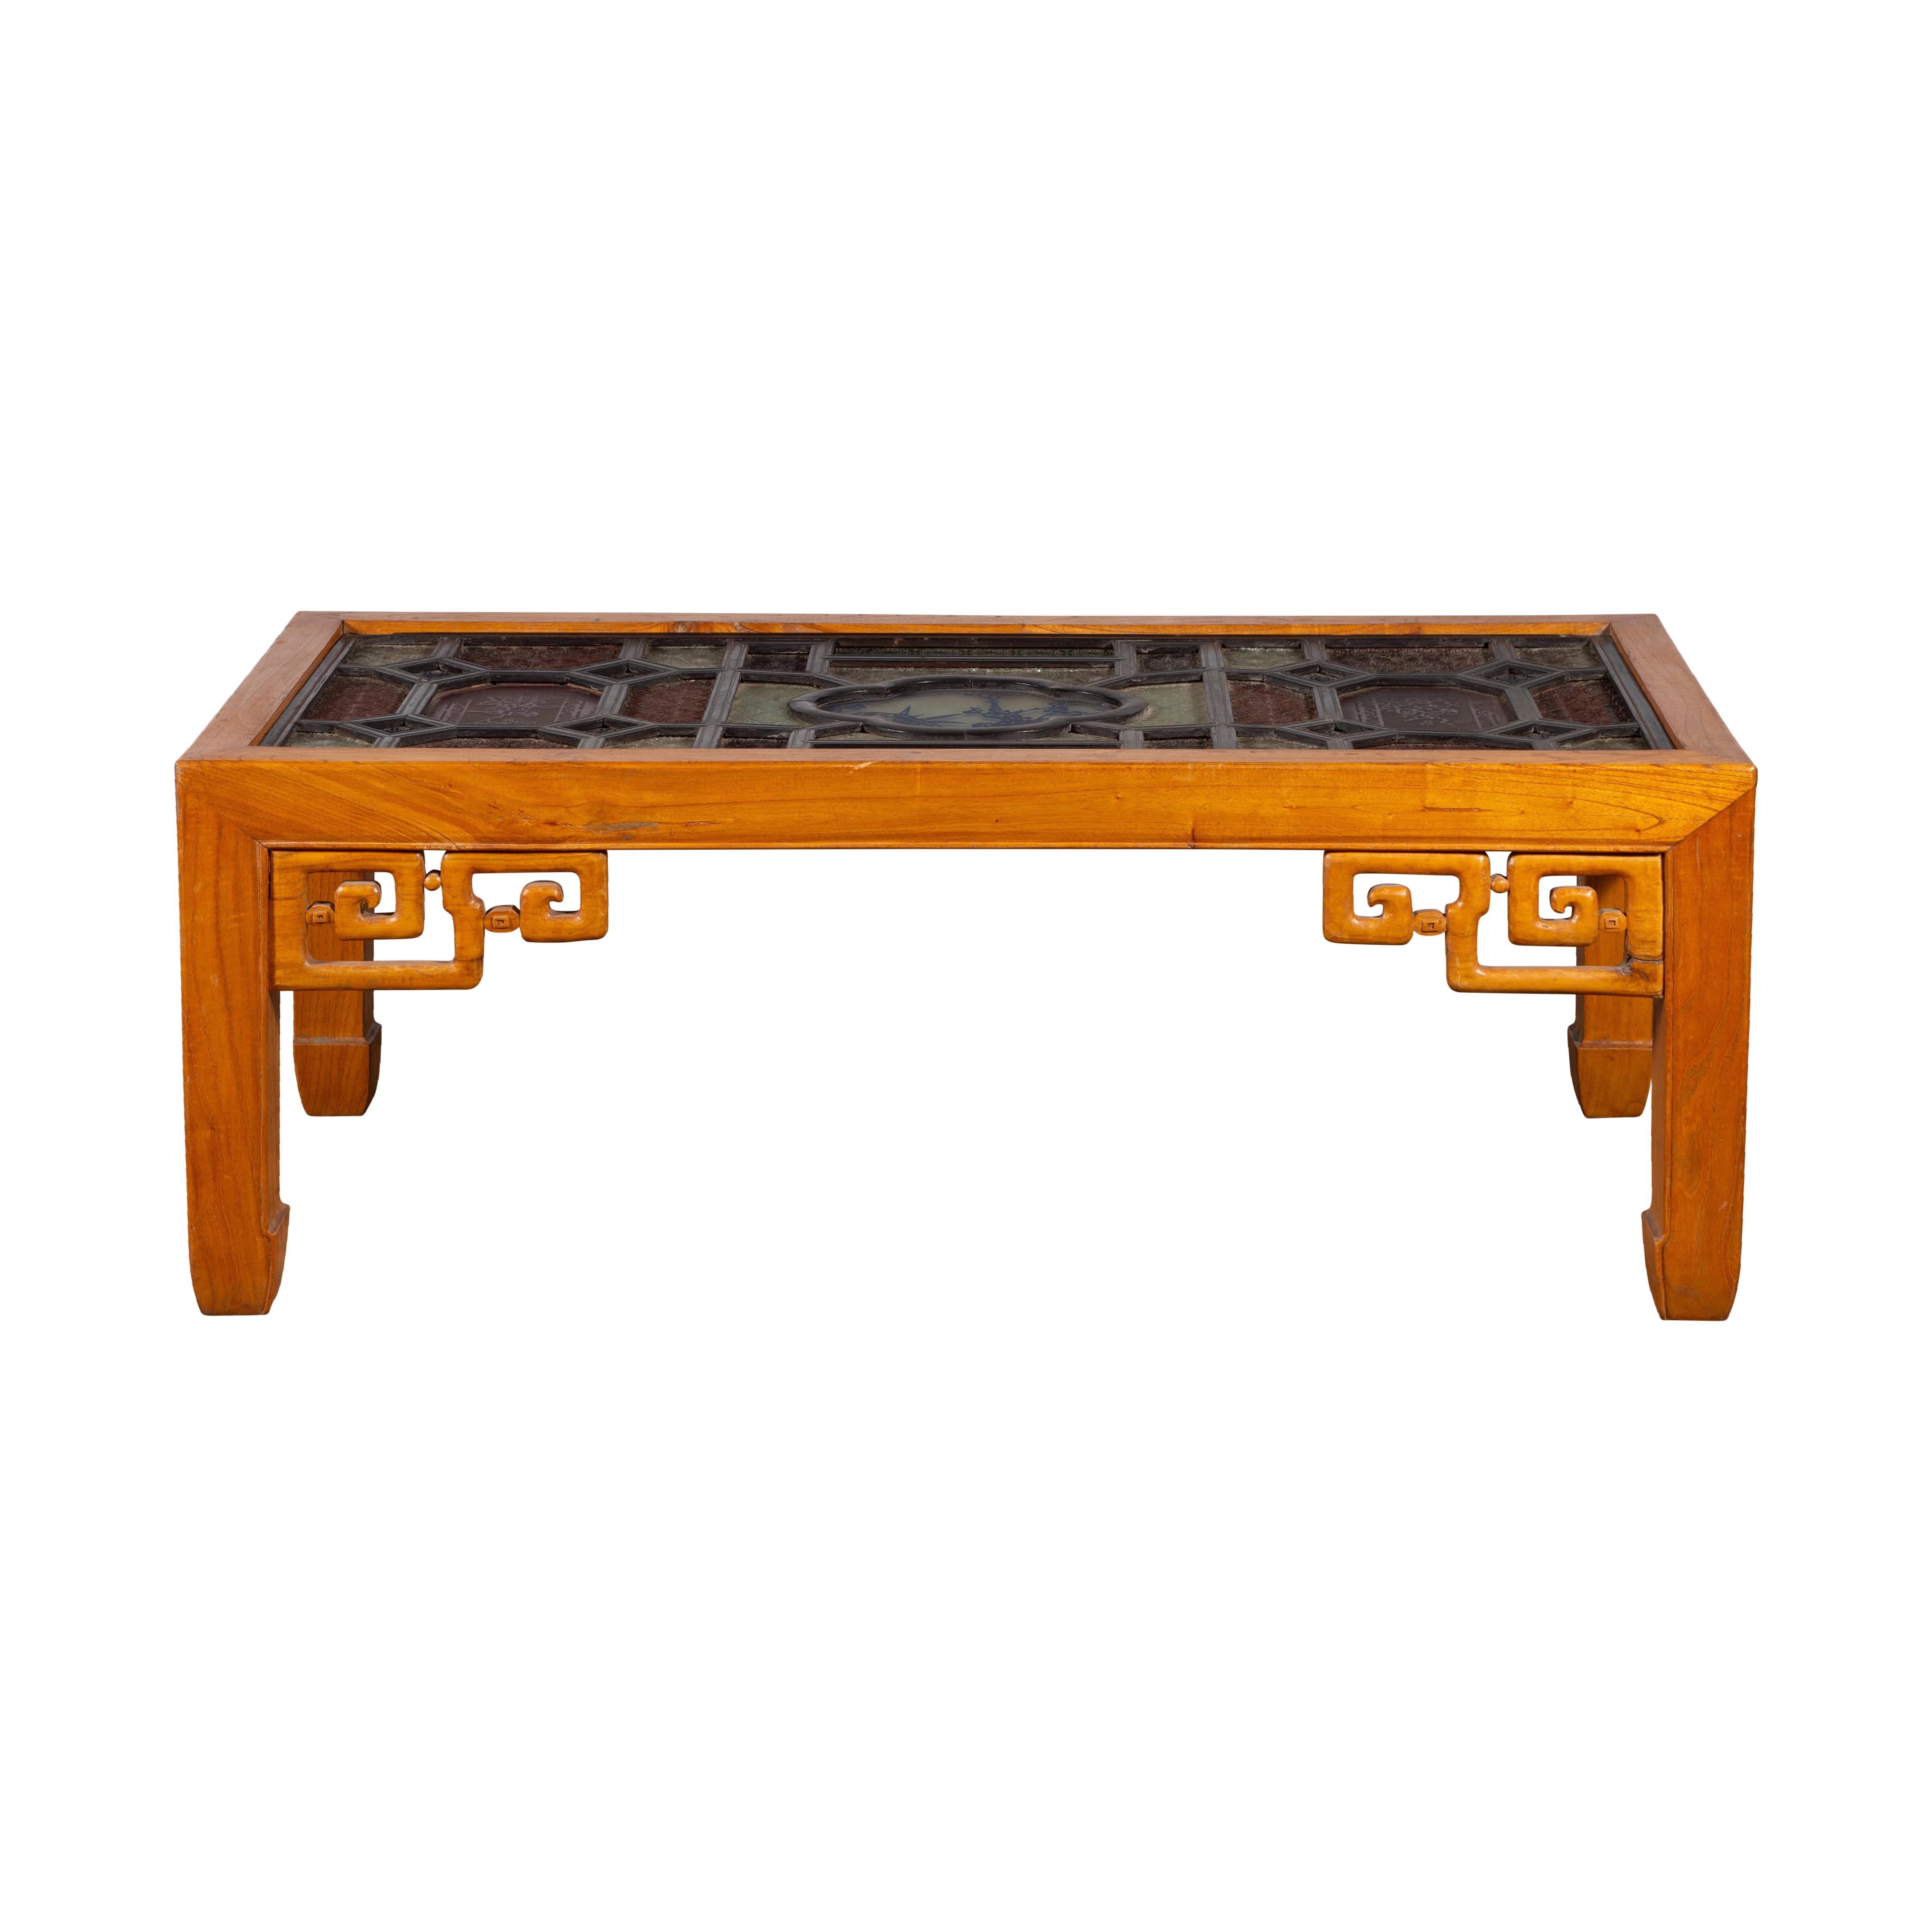 Chinese Qing Dynasty 19th Century Wooden Coffee Table with Stained Glass Top For Sale 12